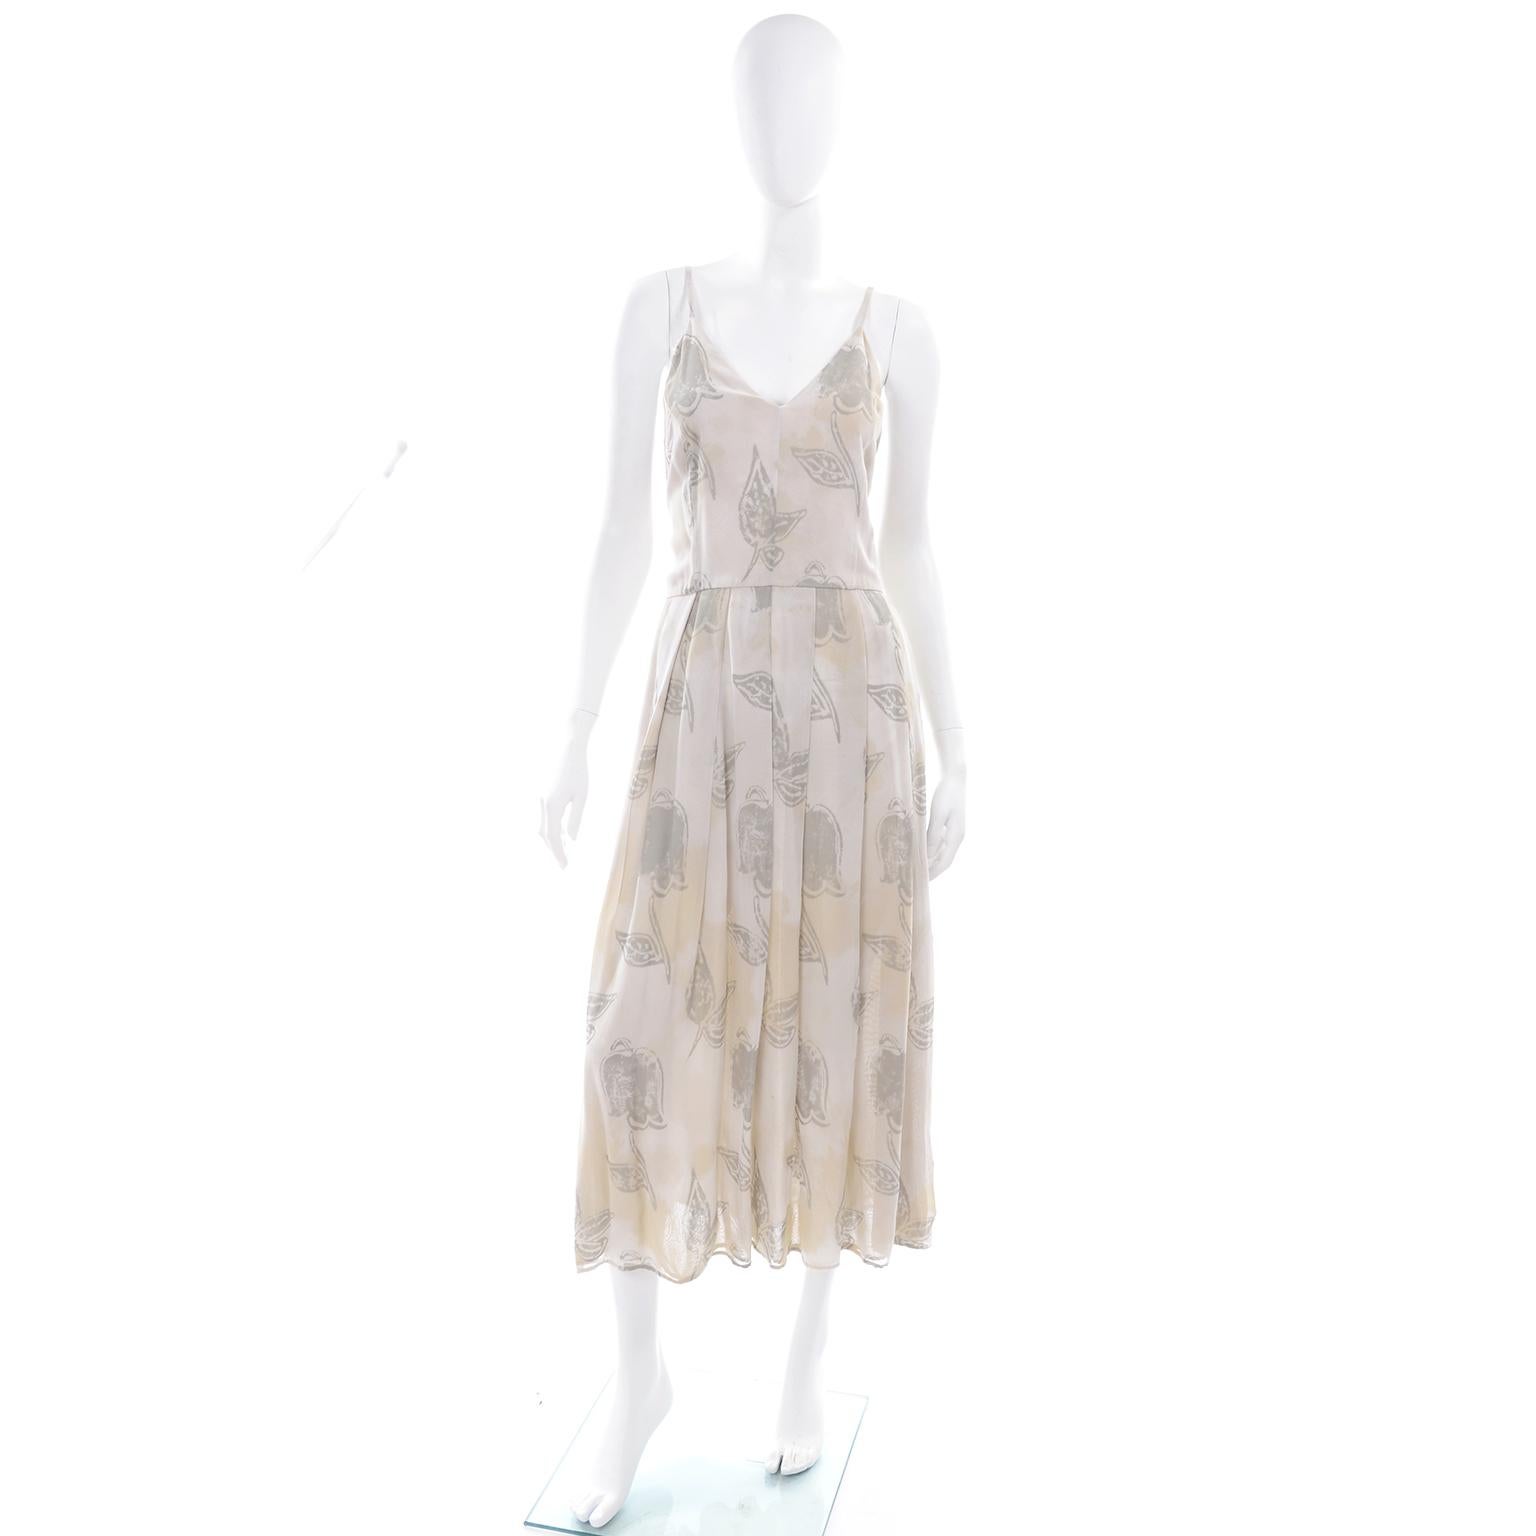 This is a unique vintage Giorgio Armani pale khaki cream and sage green dress in a pattern that has abstract leaves and purposeful color layover that almost looks like tea staining. This dress has a V-neck in front and a V in back, a pleated skirt,